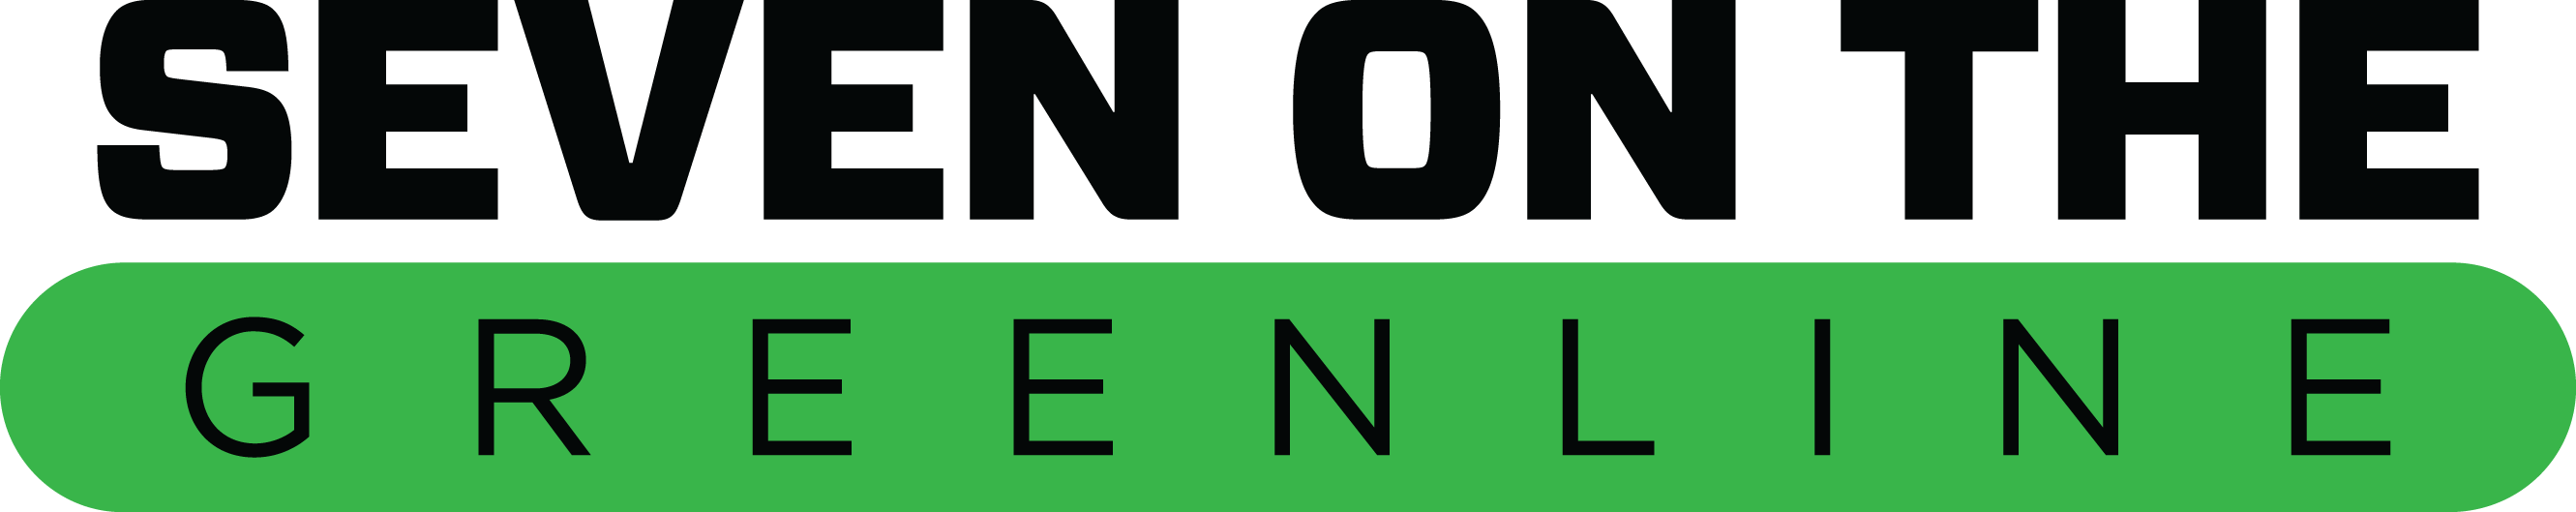 Logo of Seven on the Green Line Hat Tournament.